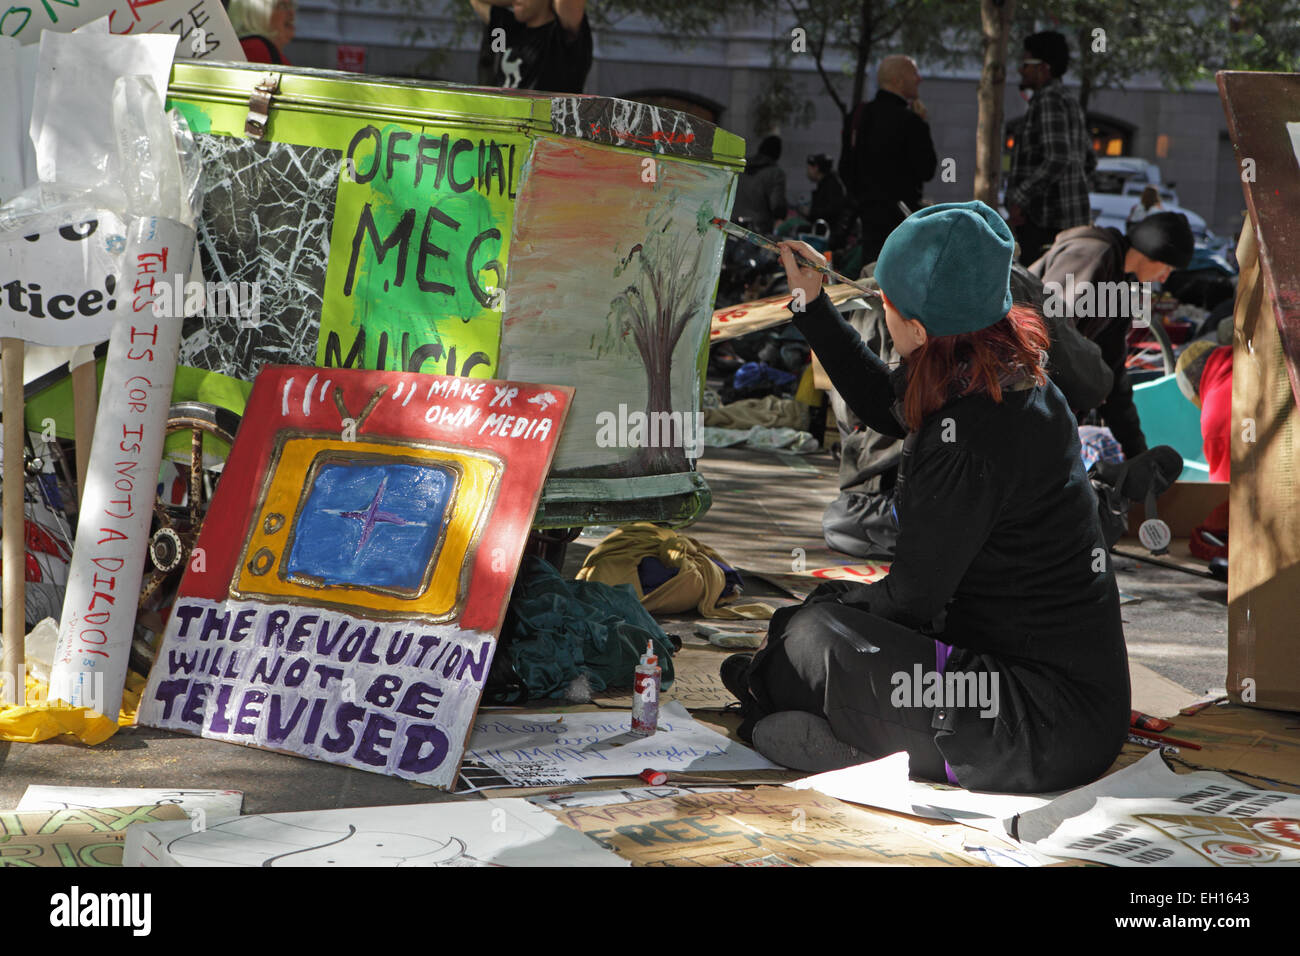 A young woman paints posters at the Occupy Wall Street protest in Zuccotti Park, New York Stock Photo